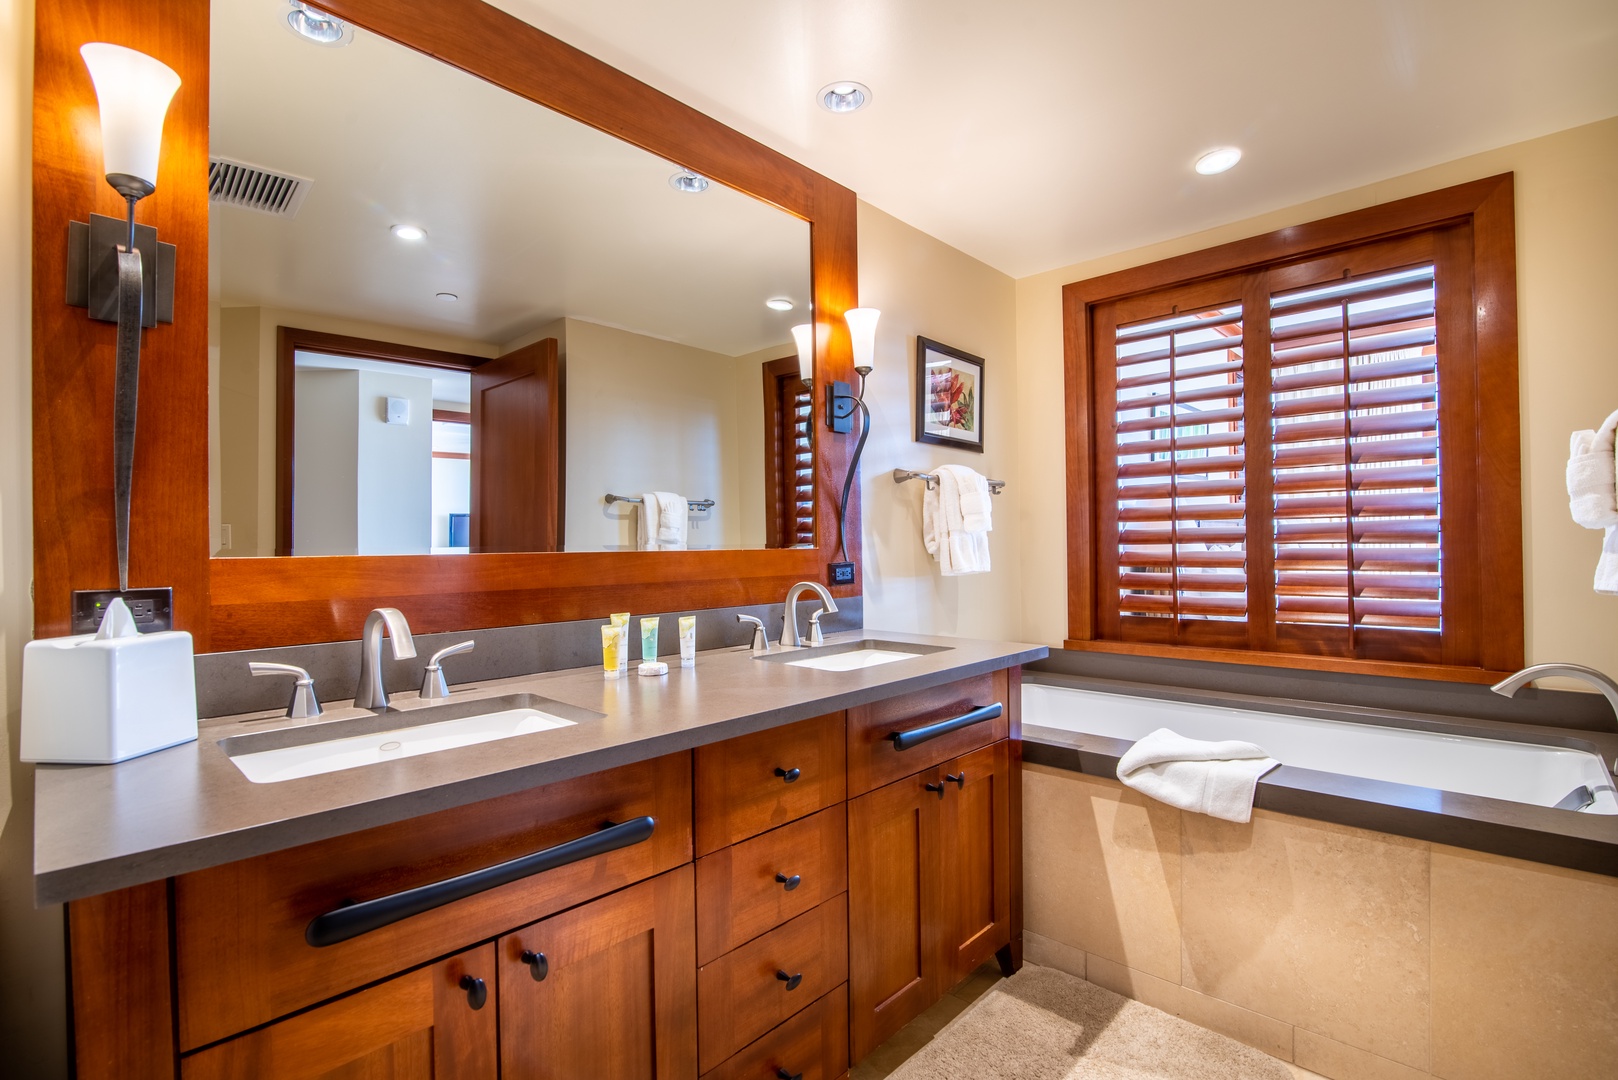 Kapolei Vacation Rentals, Ko Olina Beach Villas B609 - The primary guest bathroom with a luxurious soaking tub.